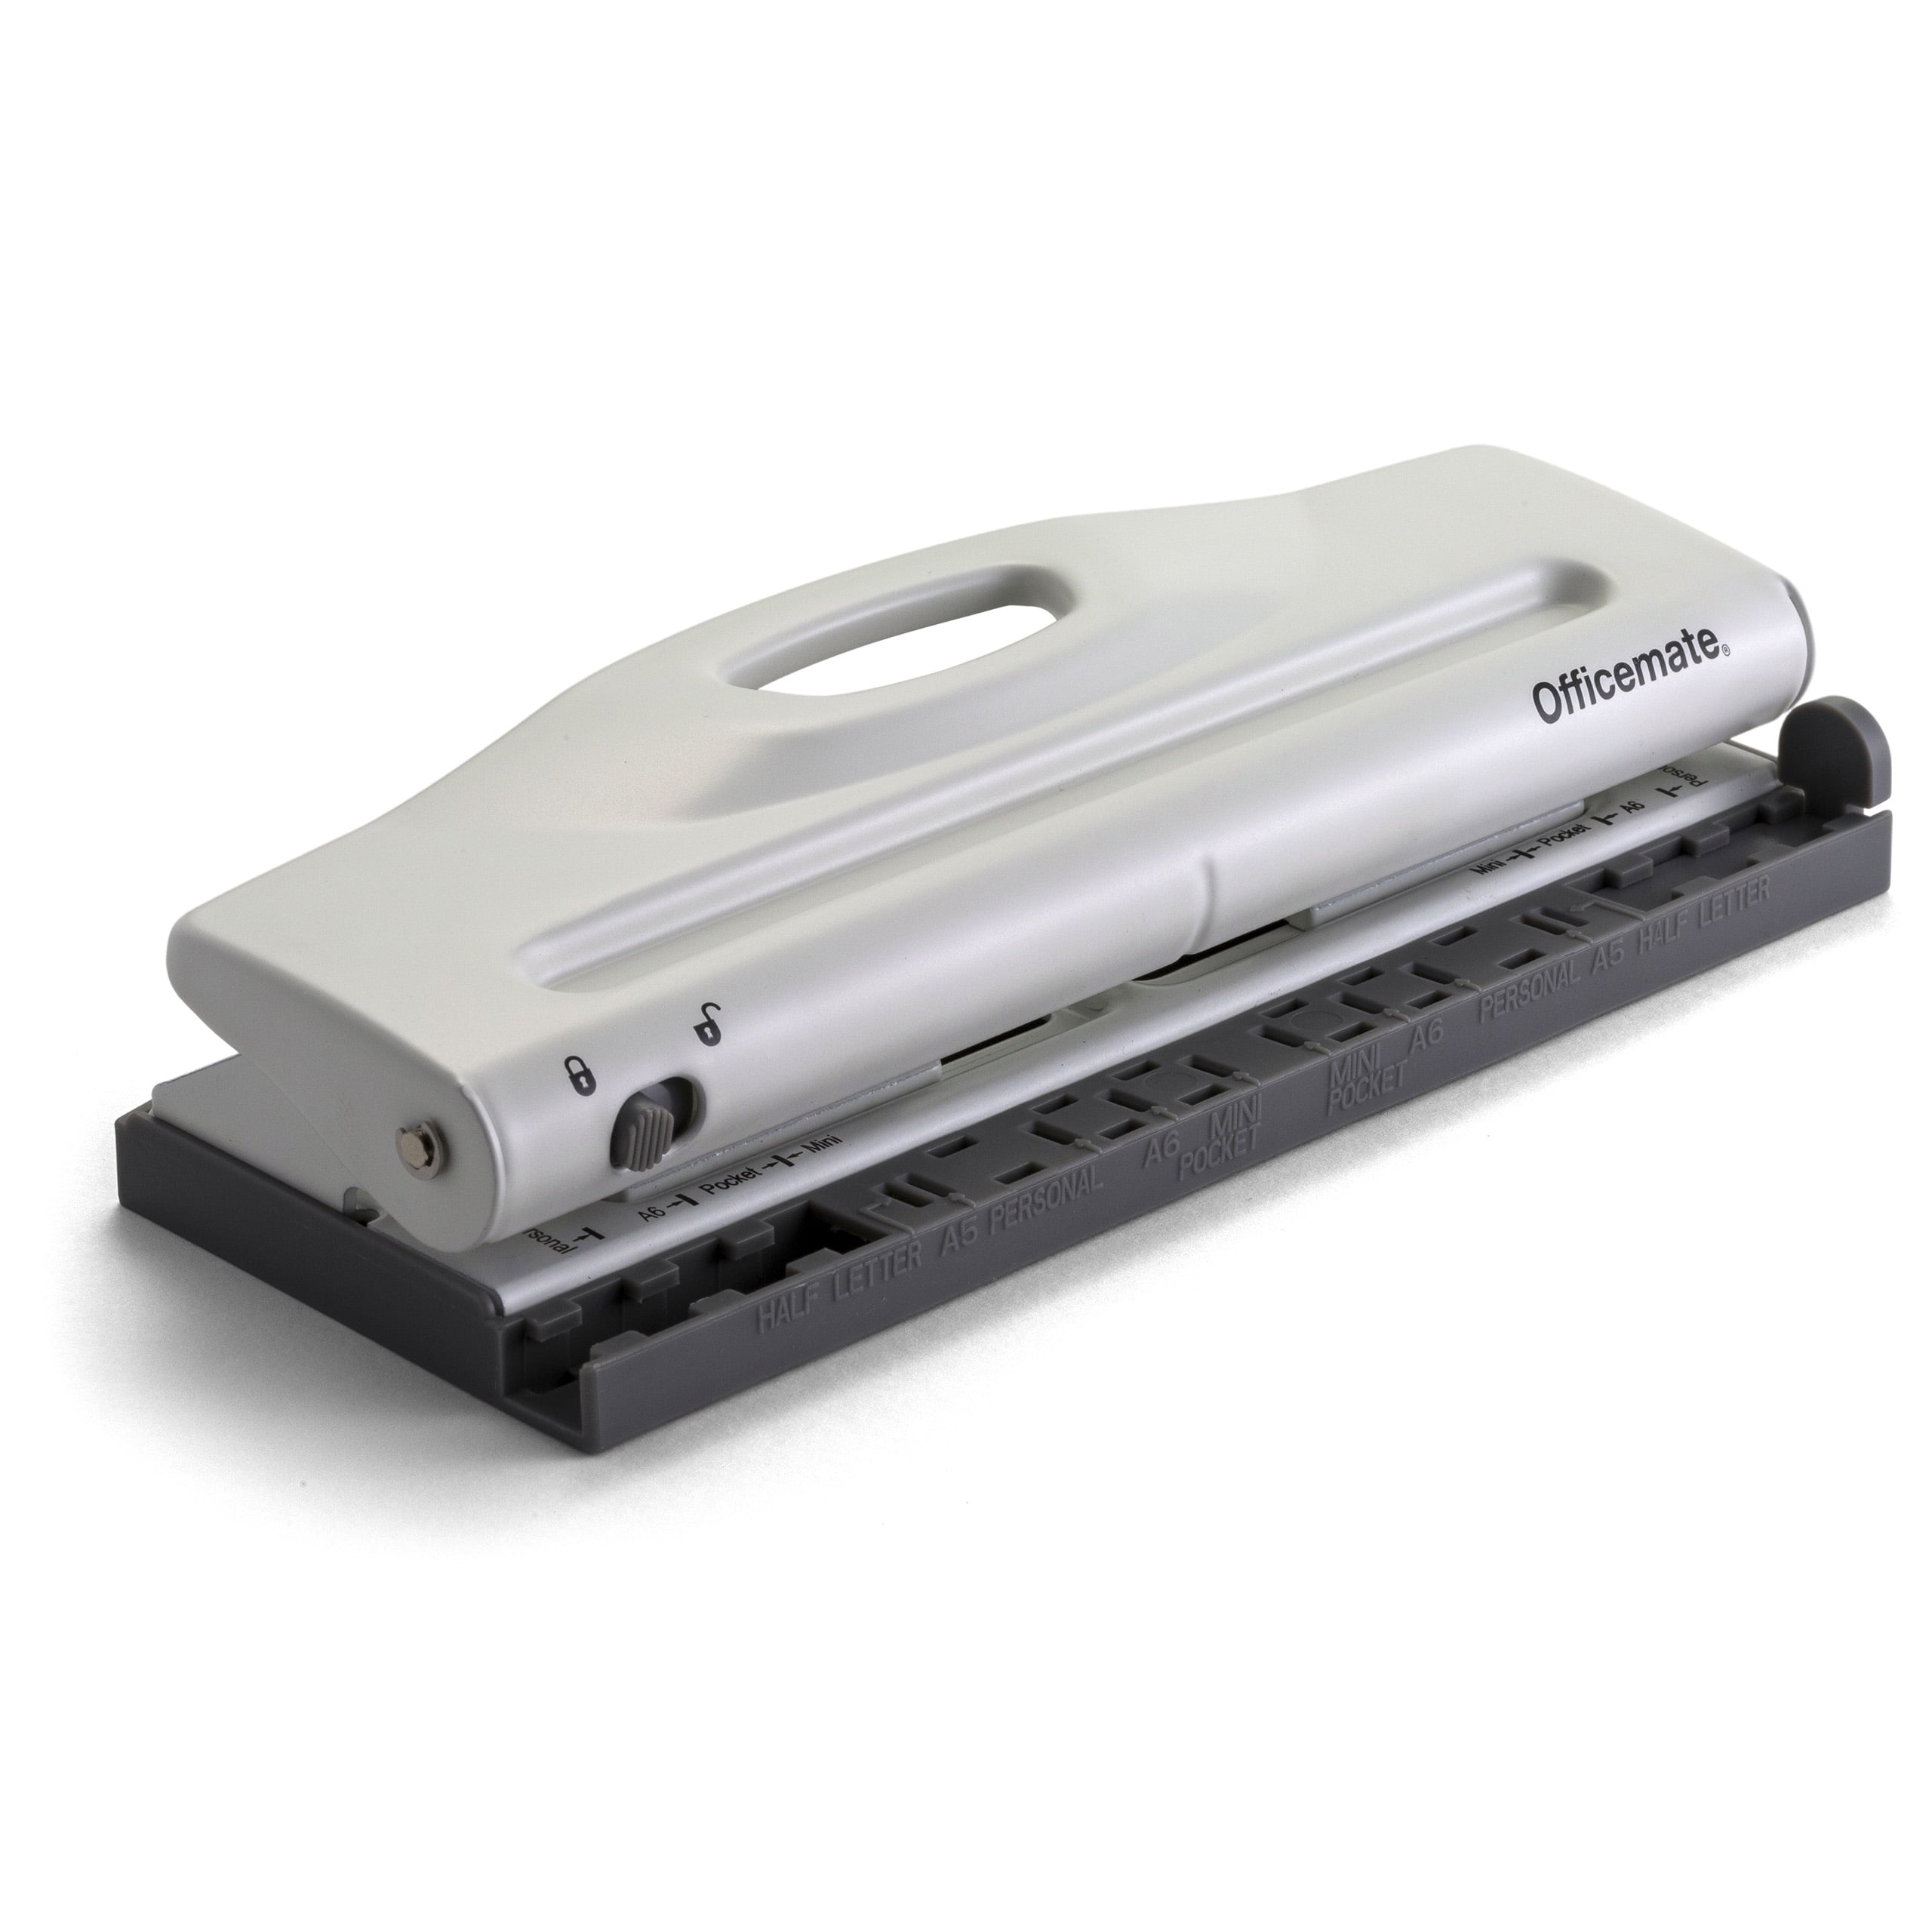 Kw-trio RNAB07MNMMZS4 kw-trio adjustable 6-hole desktop punch puncher for  a4 a5 a6 b7 dairy planner organizer six ring binder with 6 sheet capacity